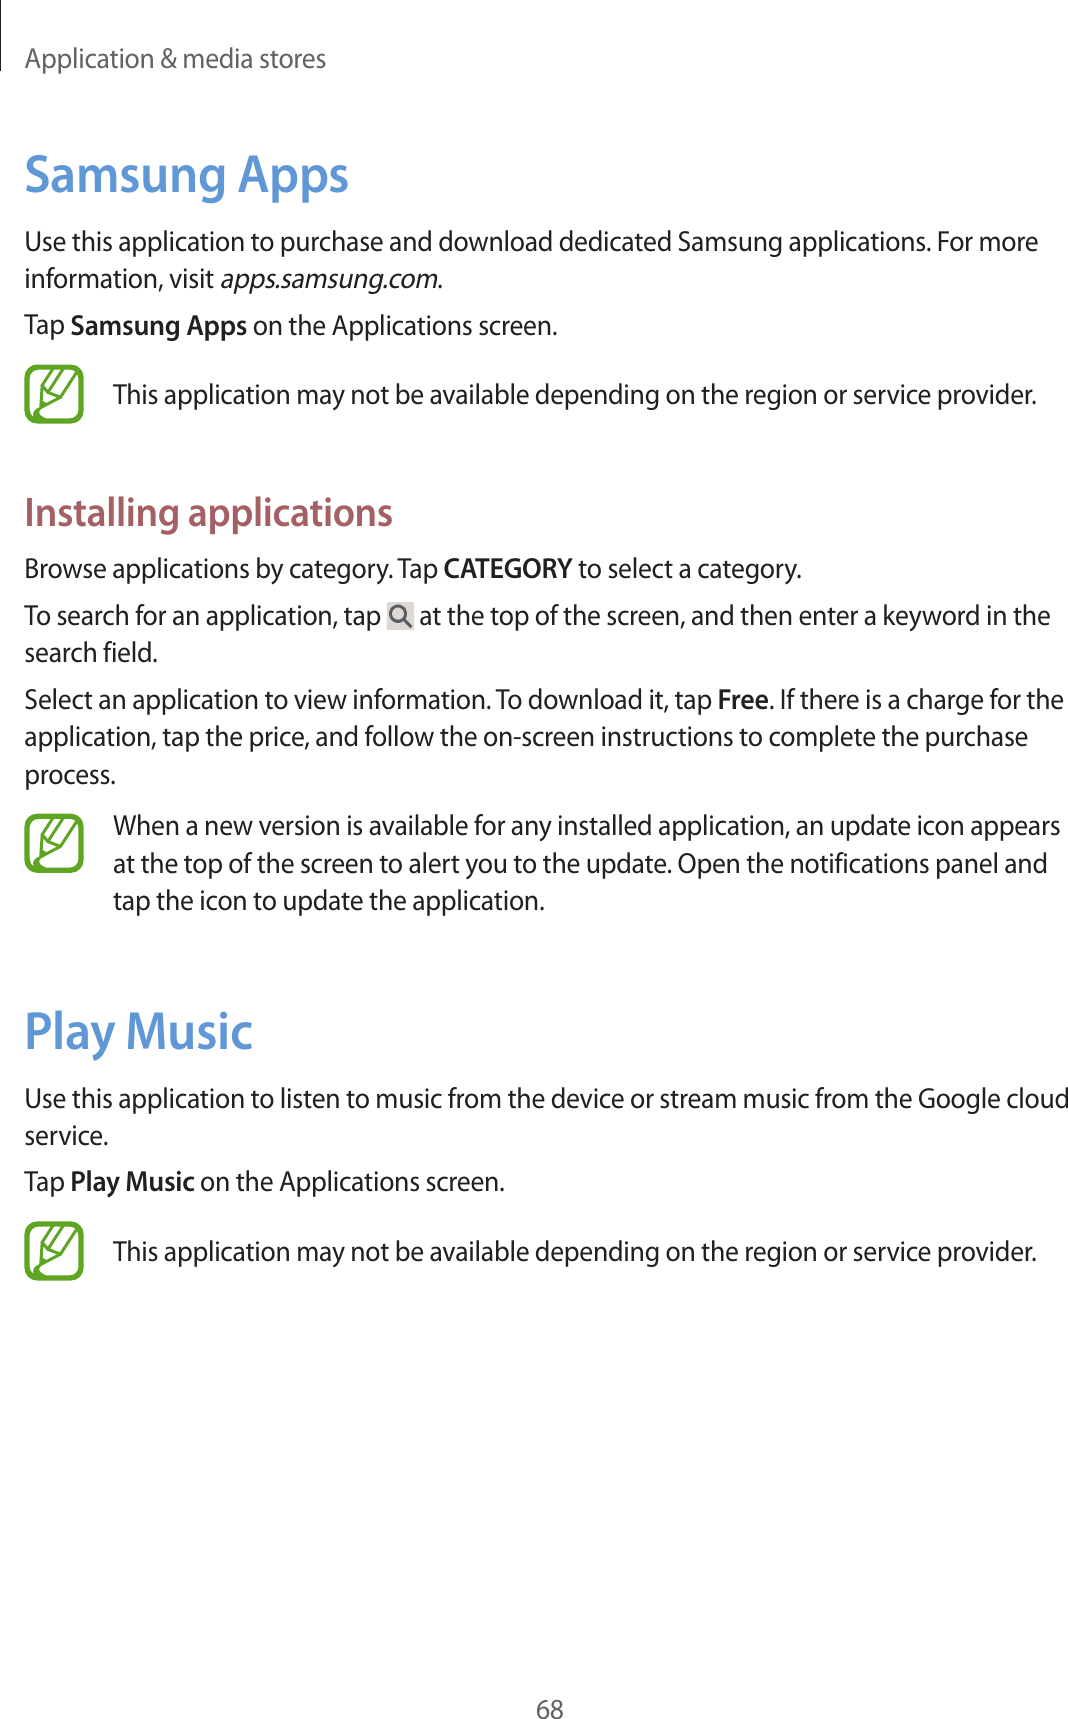 Application &amp; media stores68Samsung AppsUse this application to purchase and download dedicated Samsung applications. For more information, visit apps.samsung.com.Tap Samsung Apps on the Applications screen.This application may not be available depending on the region or service provider.Installing applicationsBrowse applications by category. Tap CATEGORY to select a category.To search for an application, tap   at the top of the screen, and then enter a keyword in the search field.Select an application to view information. To download it, tap Free. If there is a charge for the application, tap the price, and follow the on-screen instructions to complete the purchase process.When a new version is available for any installed application, an update icon appears at the top of the screen to alert you to the update. Open the notifications panel and tap the icon to update the application.Play MusicUse this application to listen to music from the device or stream music from the Google cloud service.Tap Play Music on the Applications screen.This application may not be available depending on the region or service provider.